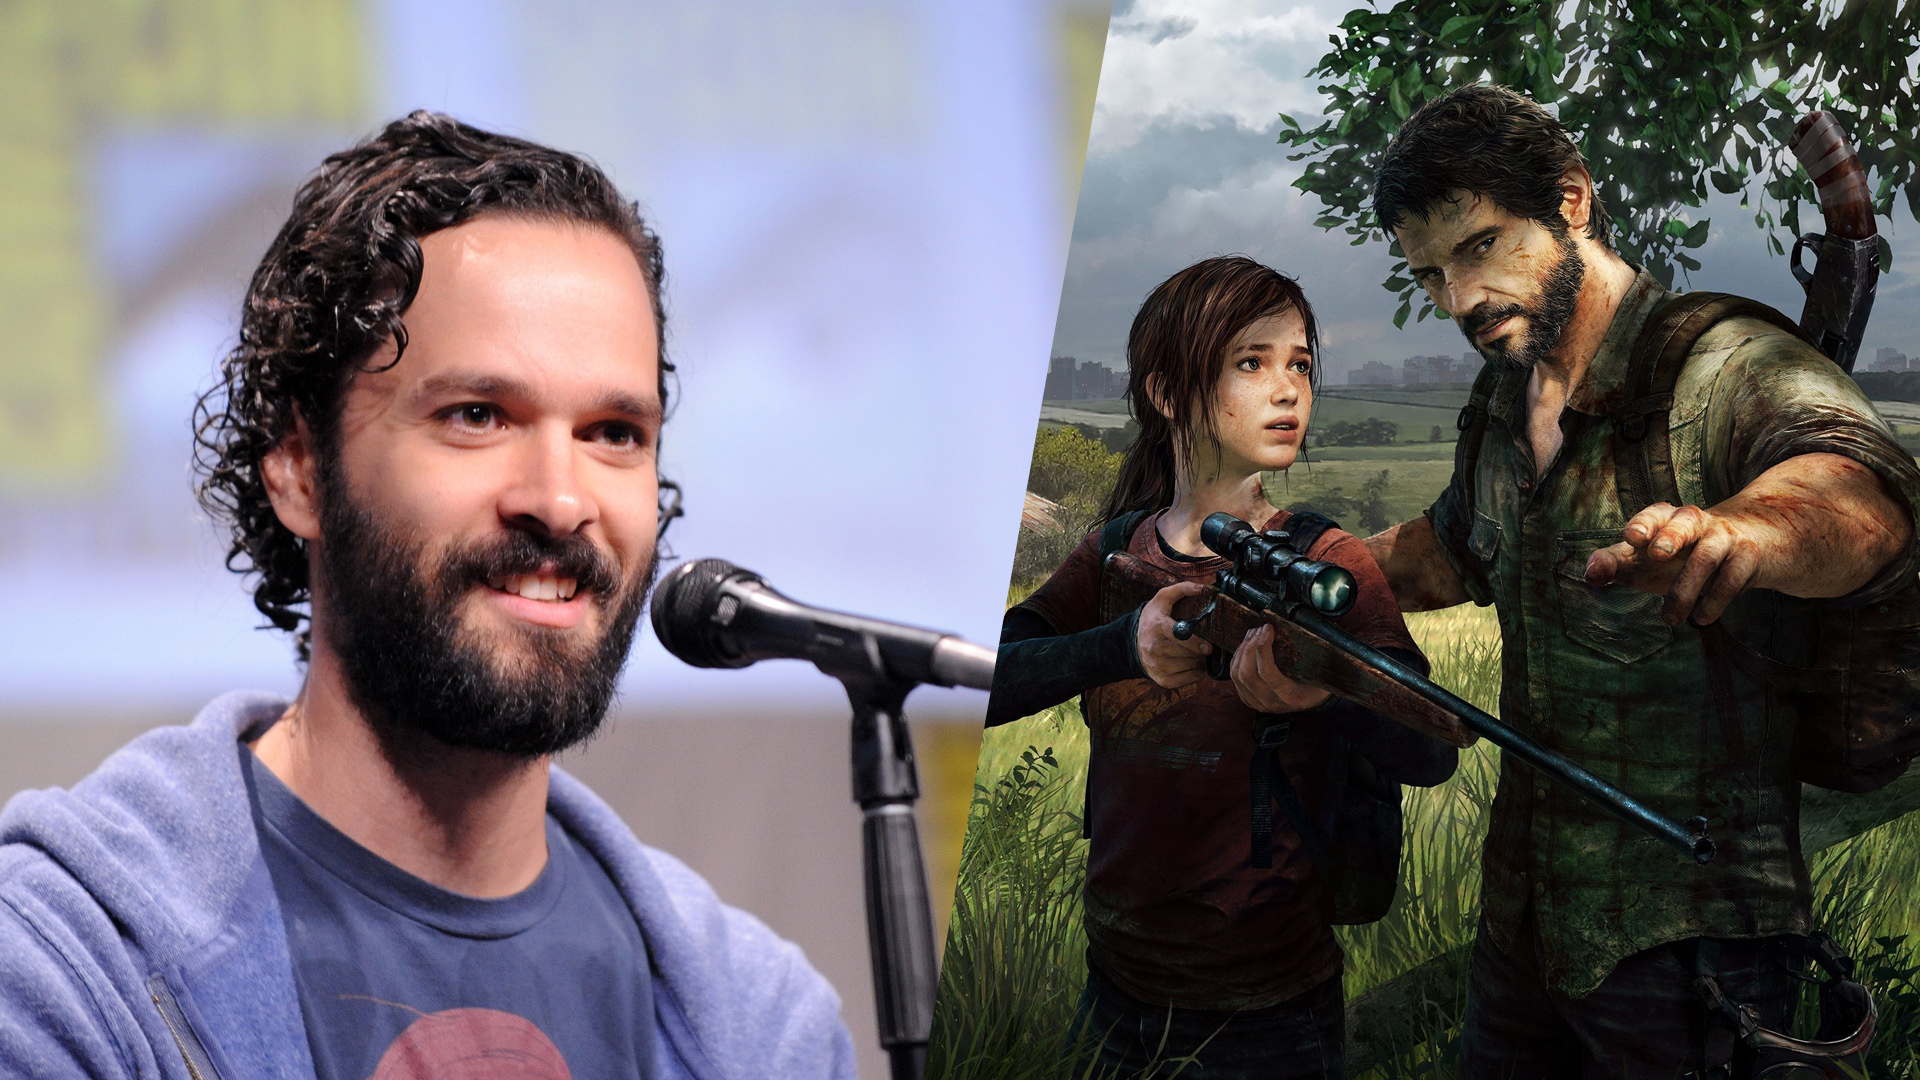 Neil Druckmann is a writer, director, and co-president of 'Naughty